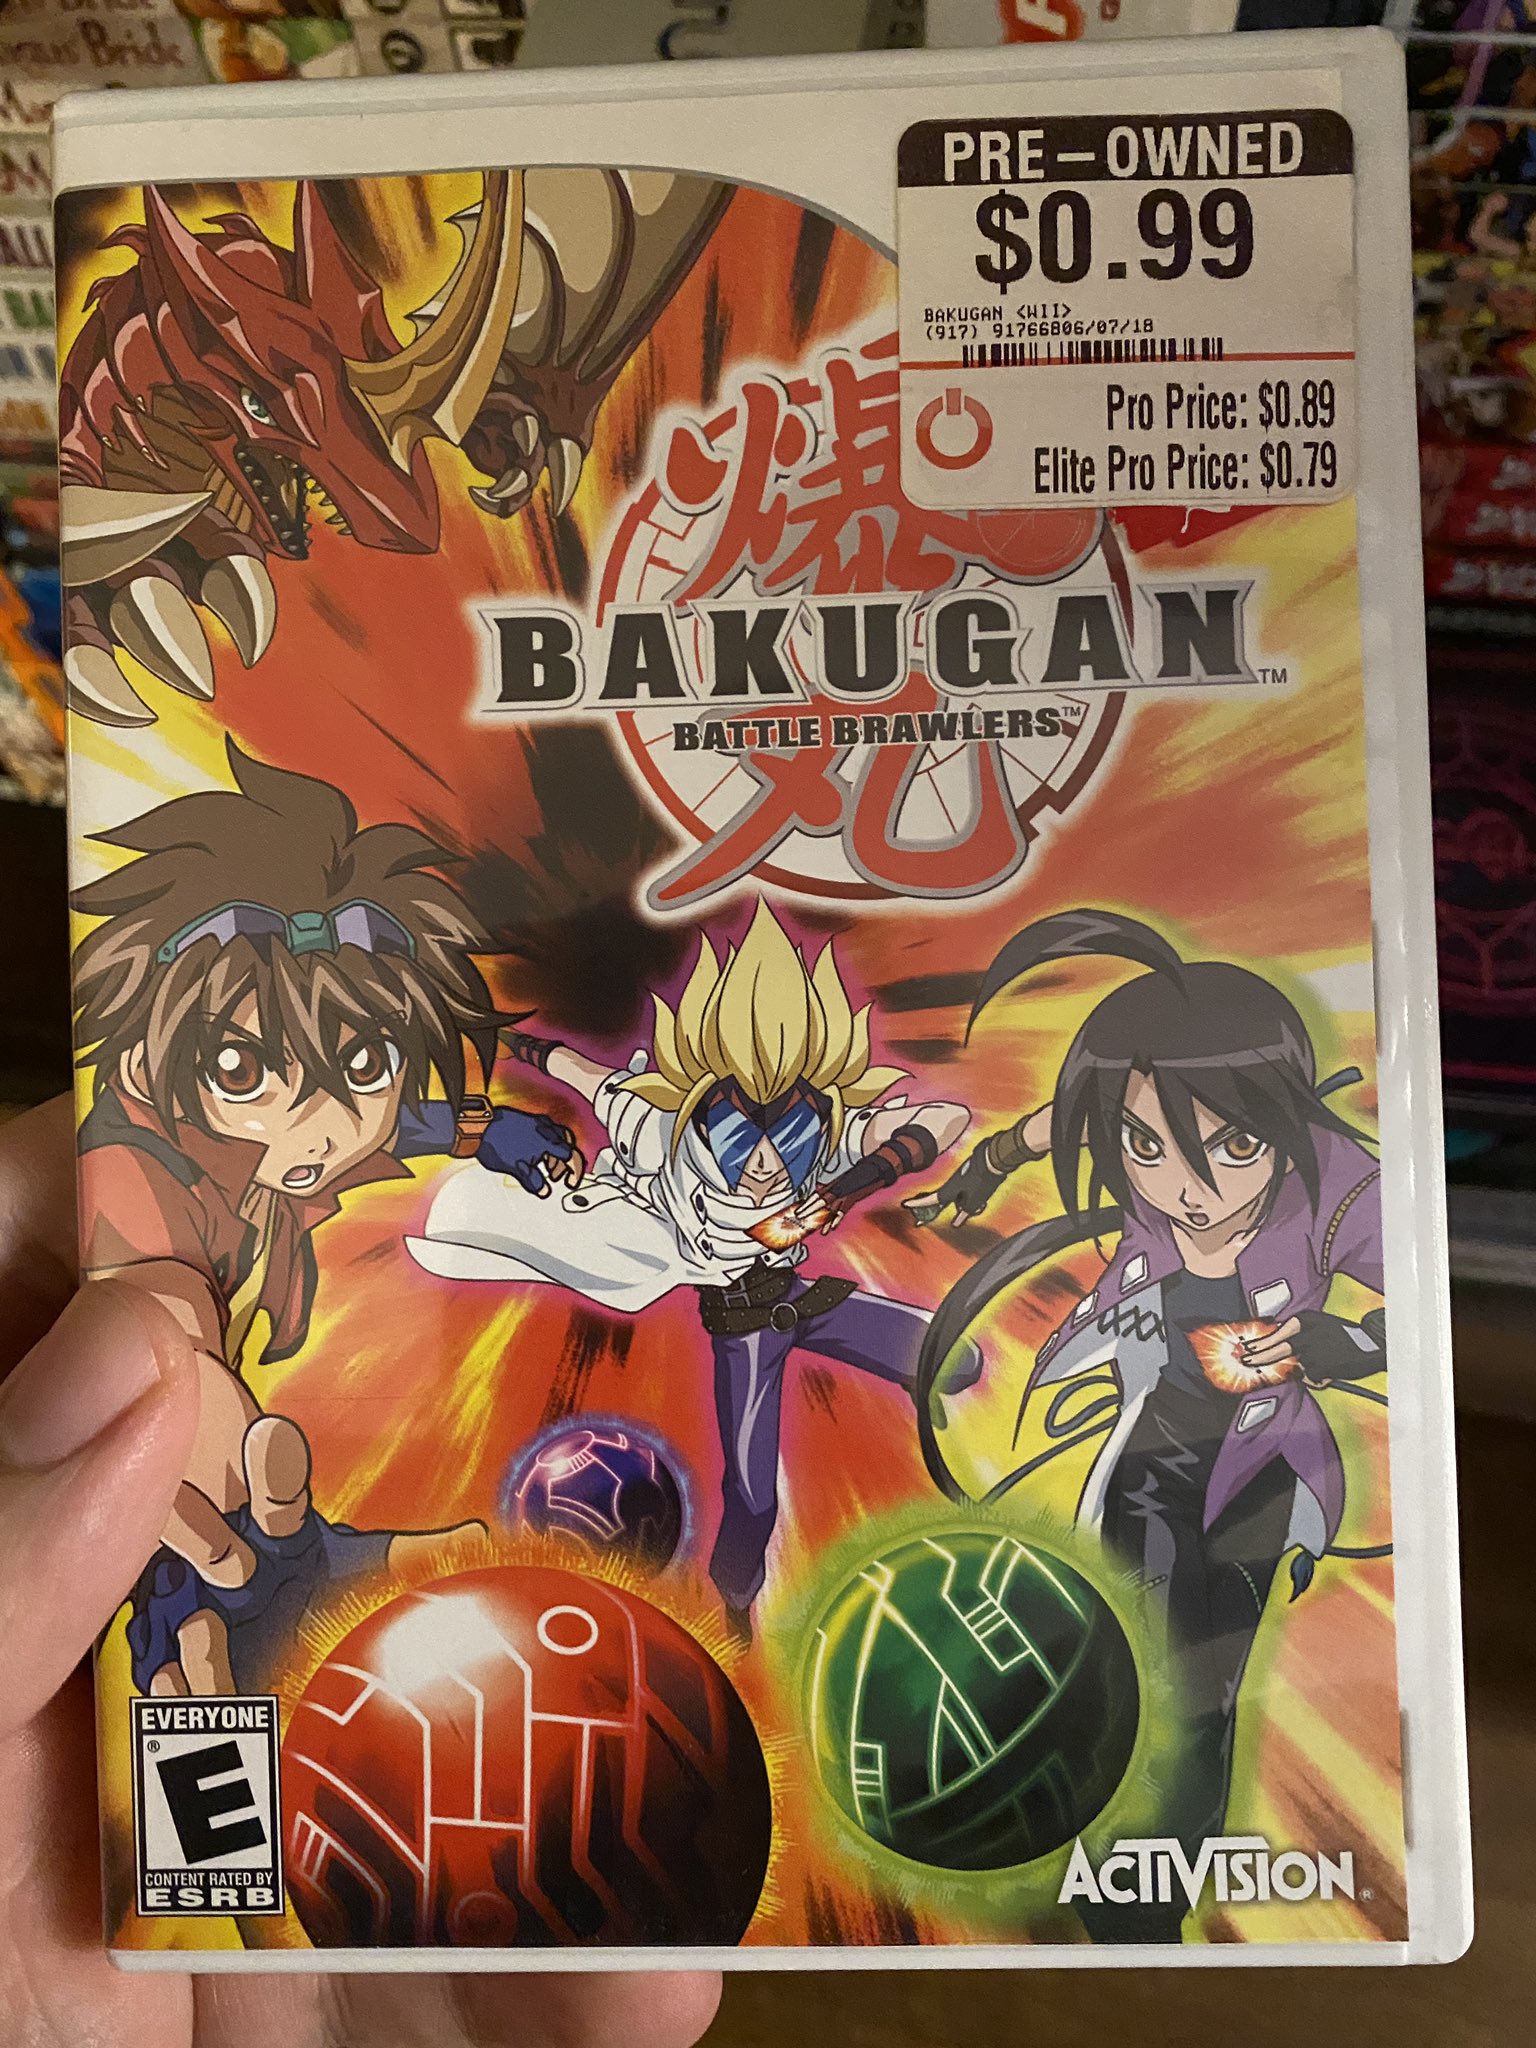 Guggenheim Museum hoog Netjes SomecallmeJohnny on Twitter: "I was donated a Bakugan game years ago with  no game disc. The prophecy has been fulfilled. https://t.co/YY70Y0MoWi" /  Twitter